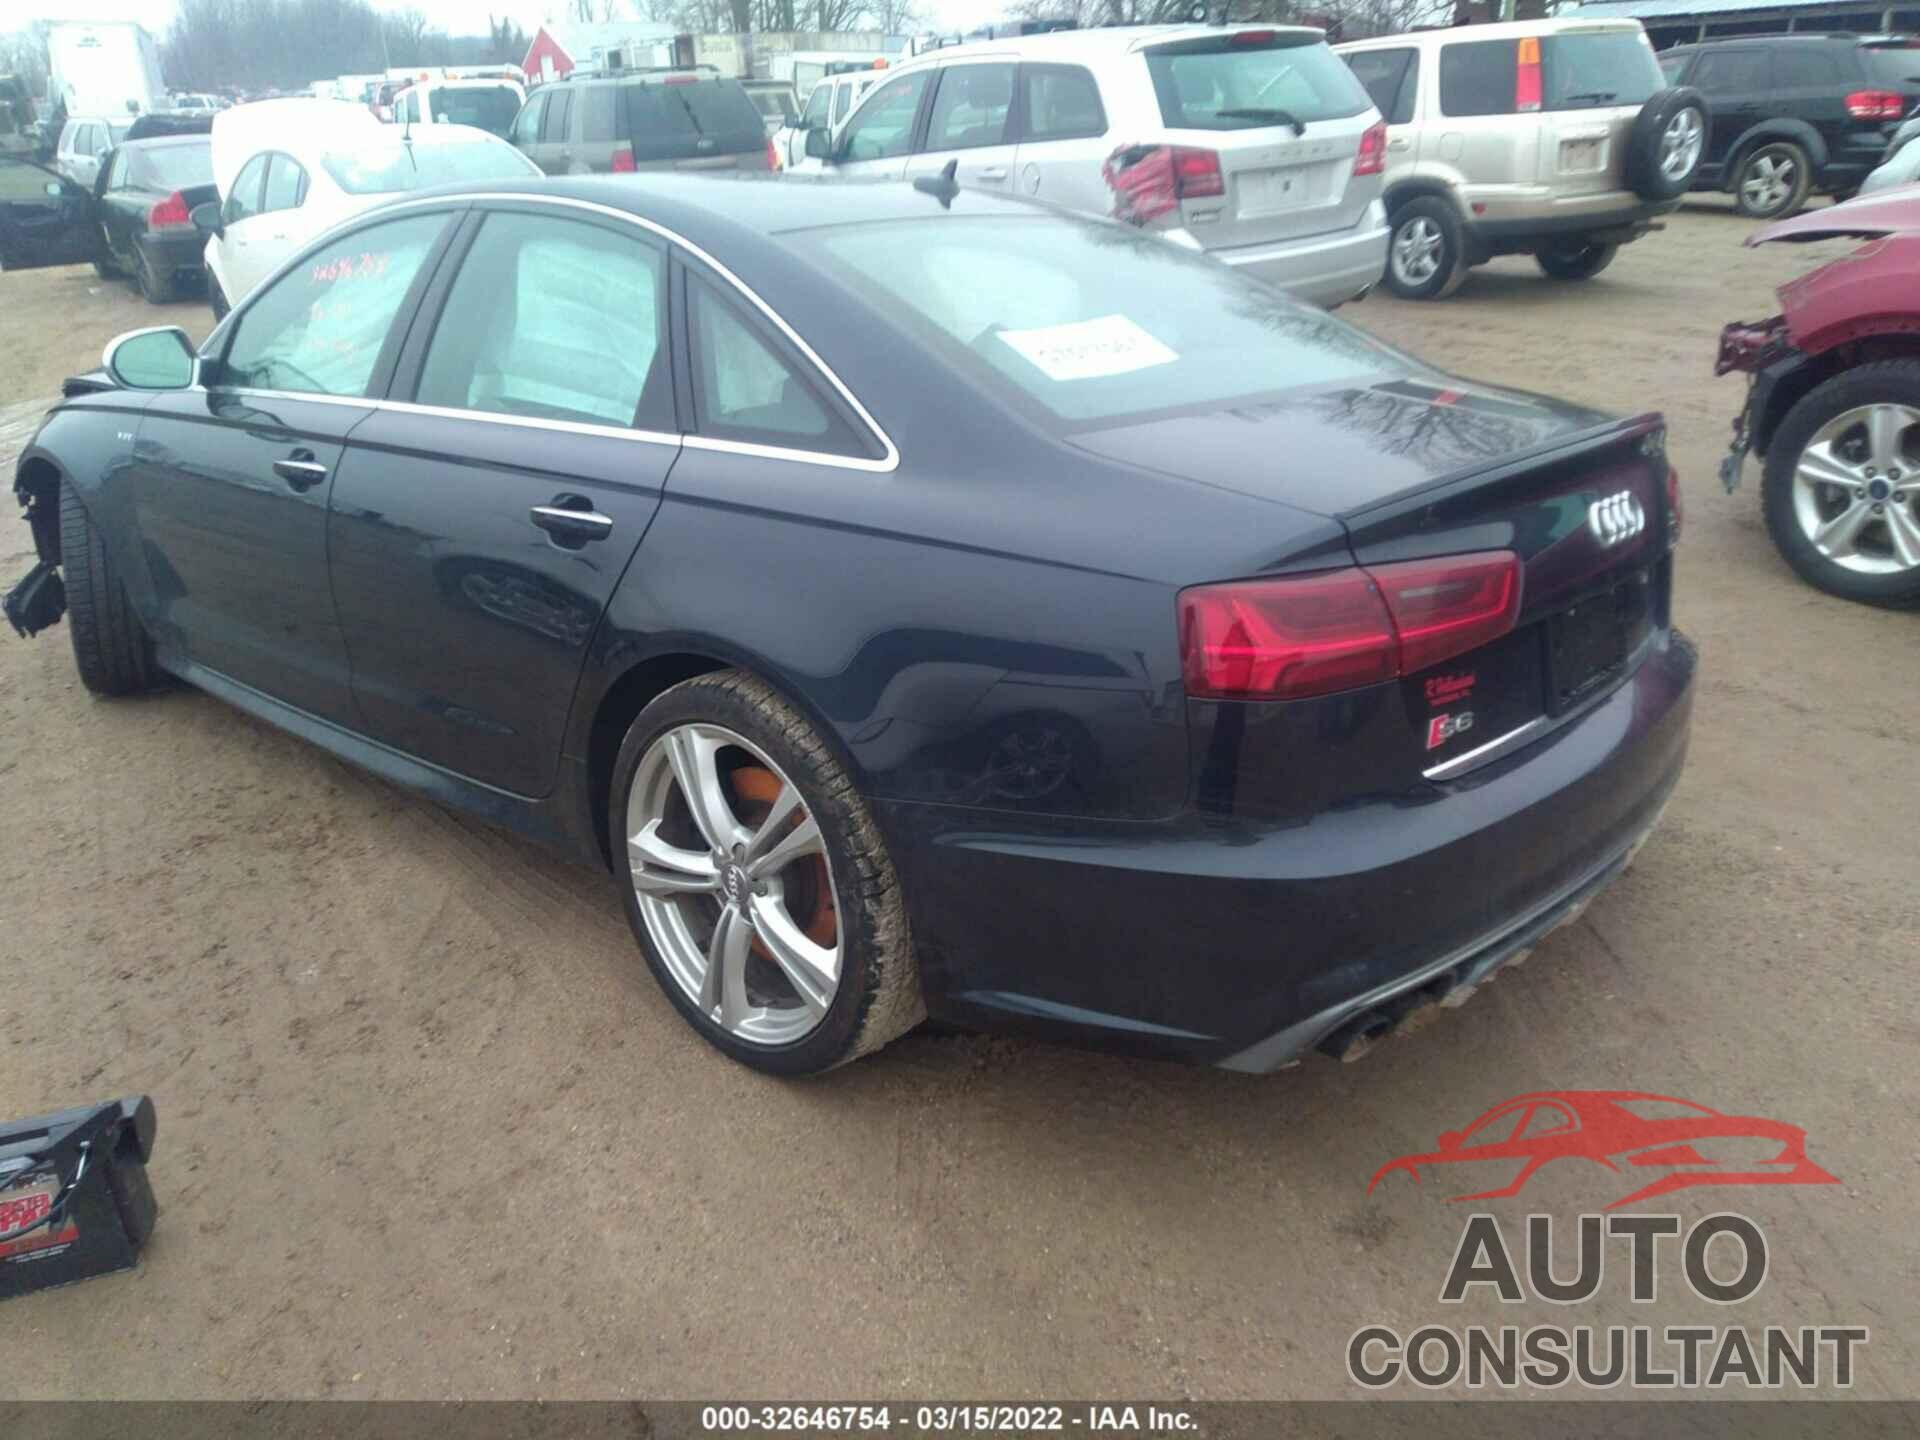 AUDI S6 2016 - WAUF2AFC4GN148559